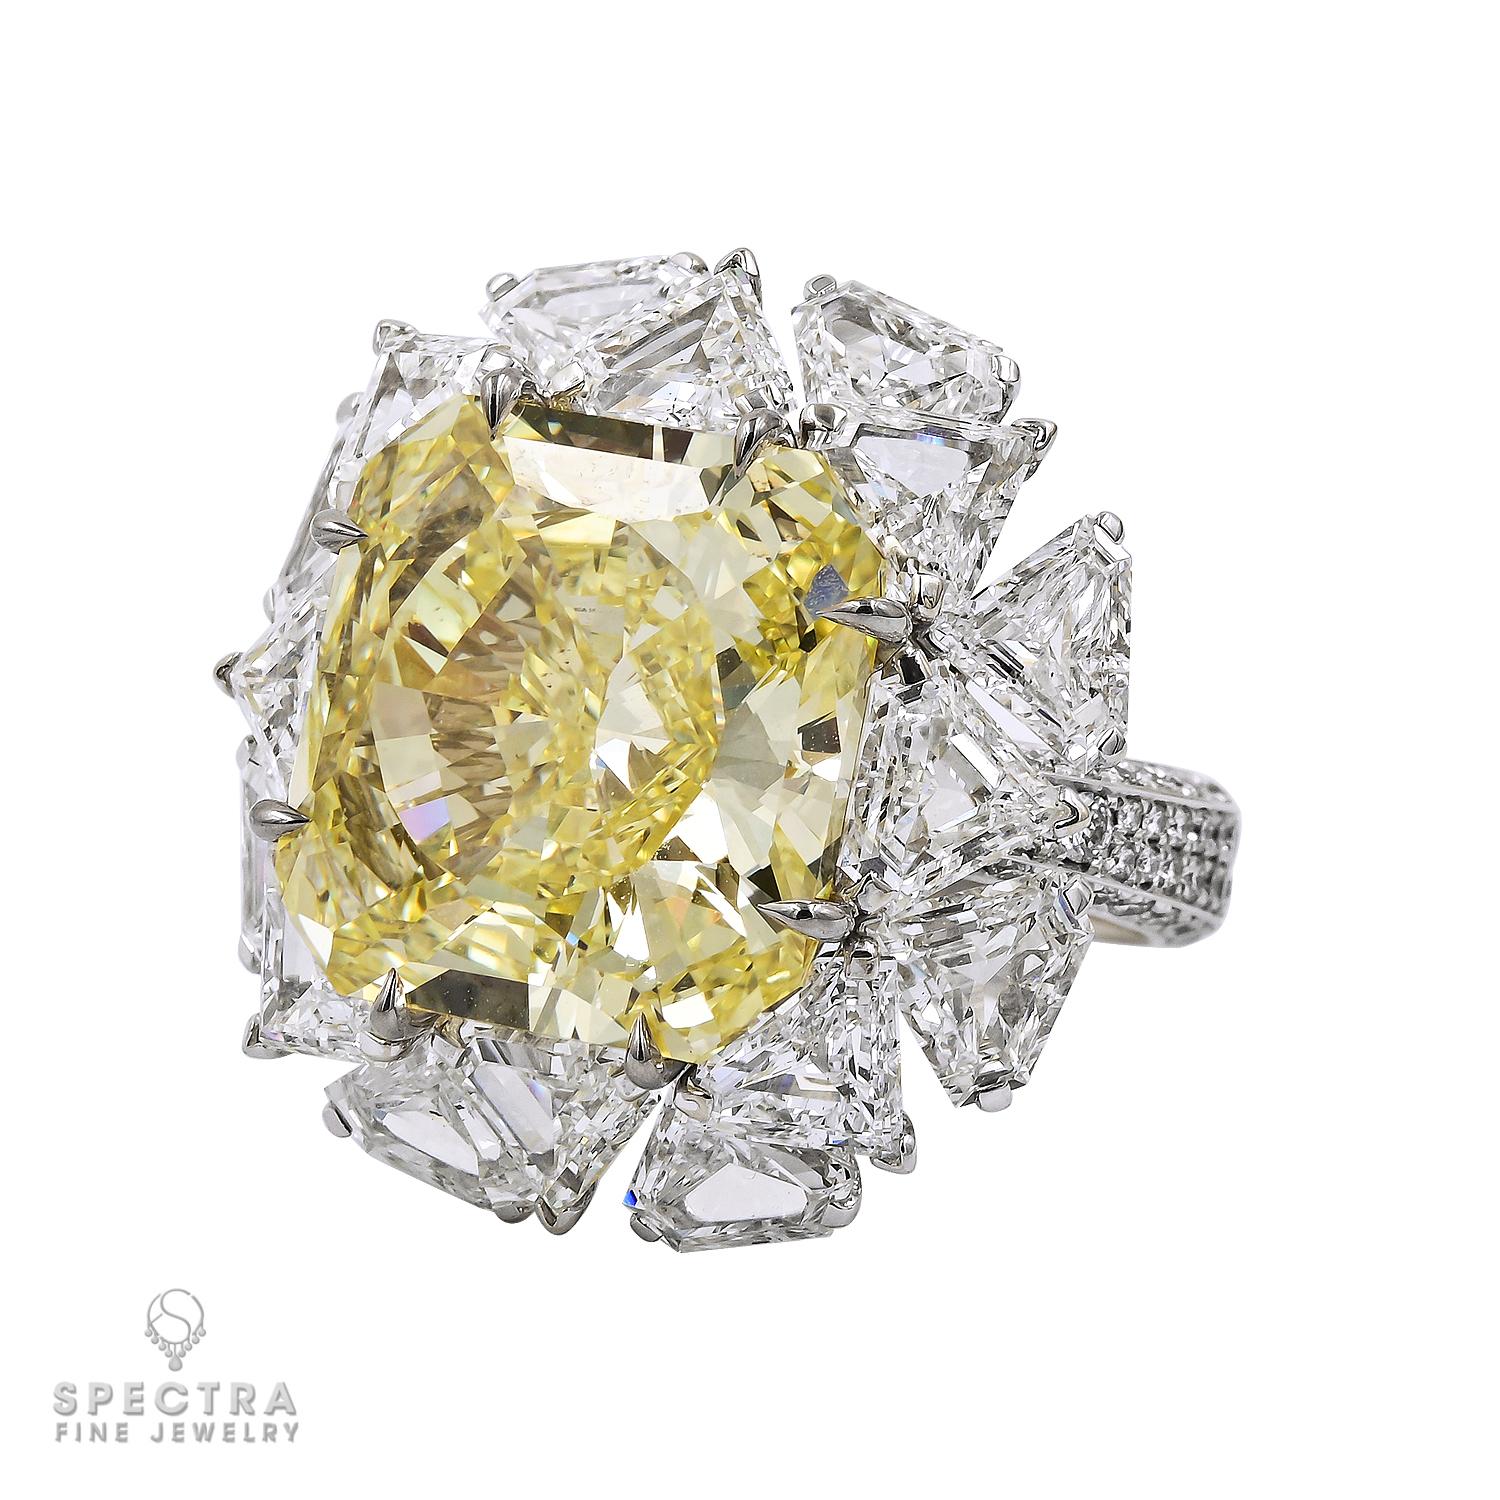 Contemporary Spectra Fine Jewelry GIA Certified 10.11 Carat Yellow Diamond Halo Ring For Sale